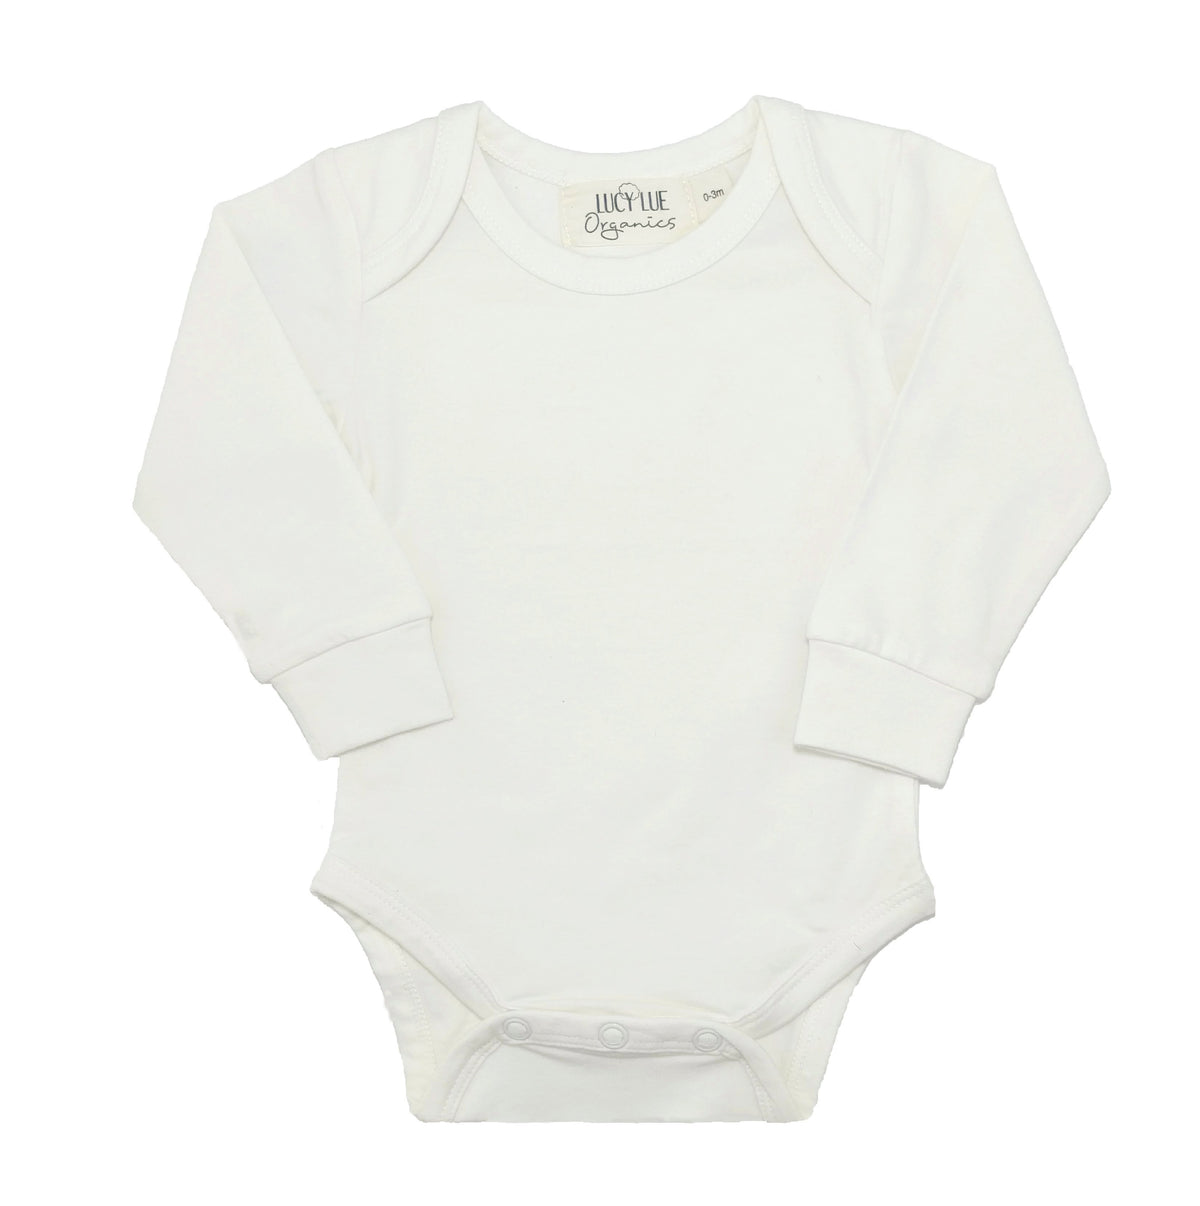 Best selling long sleeve organic baby bodysuit romper one-piece in the softest organic cotton fabric. Made by Lucy Lue Organics.  Popular gender neutral ivory color. Baby list must-have. Newborn take home outfit. Baby clothing. Baby clothes